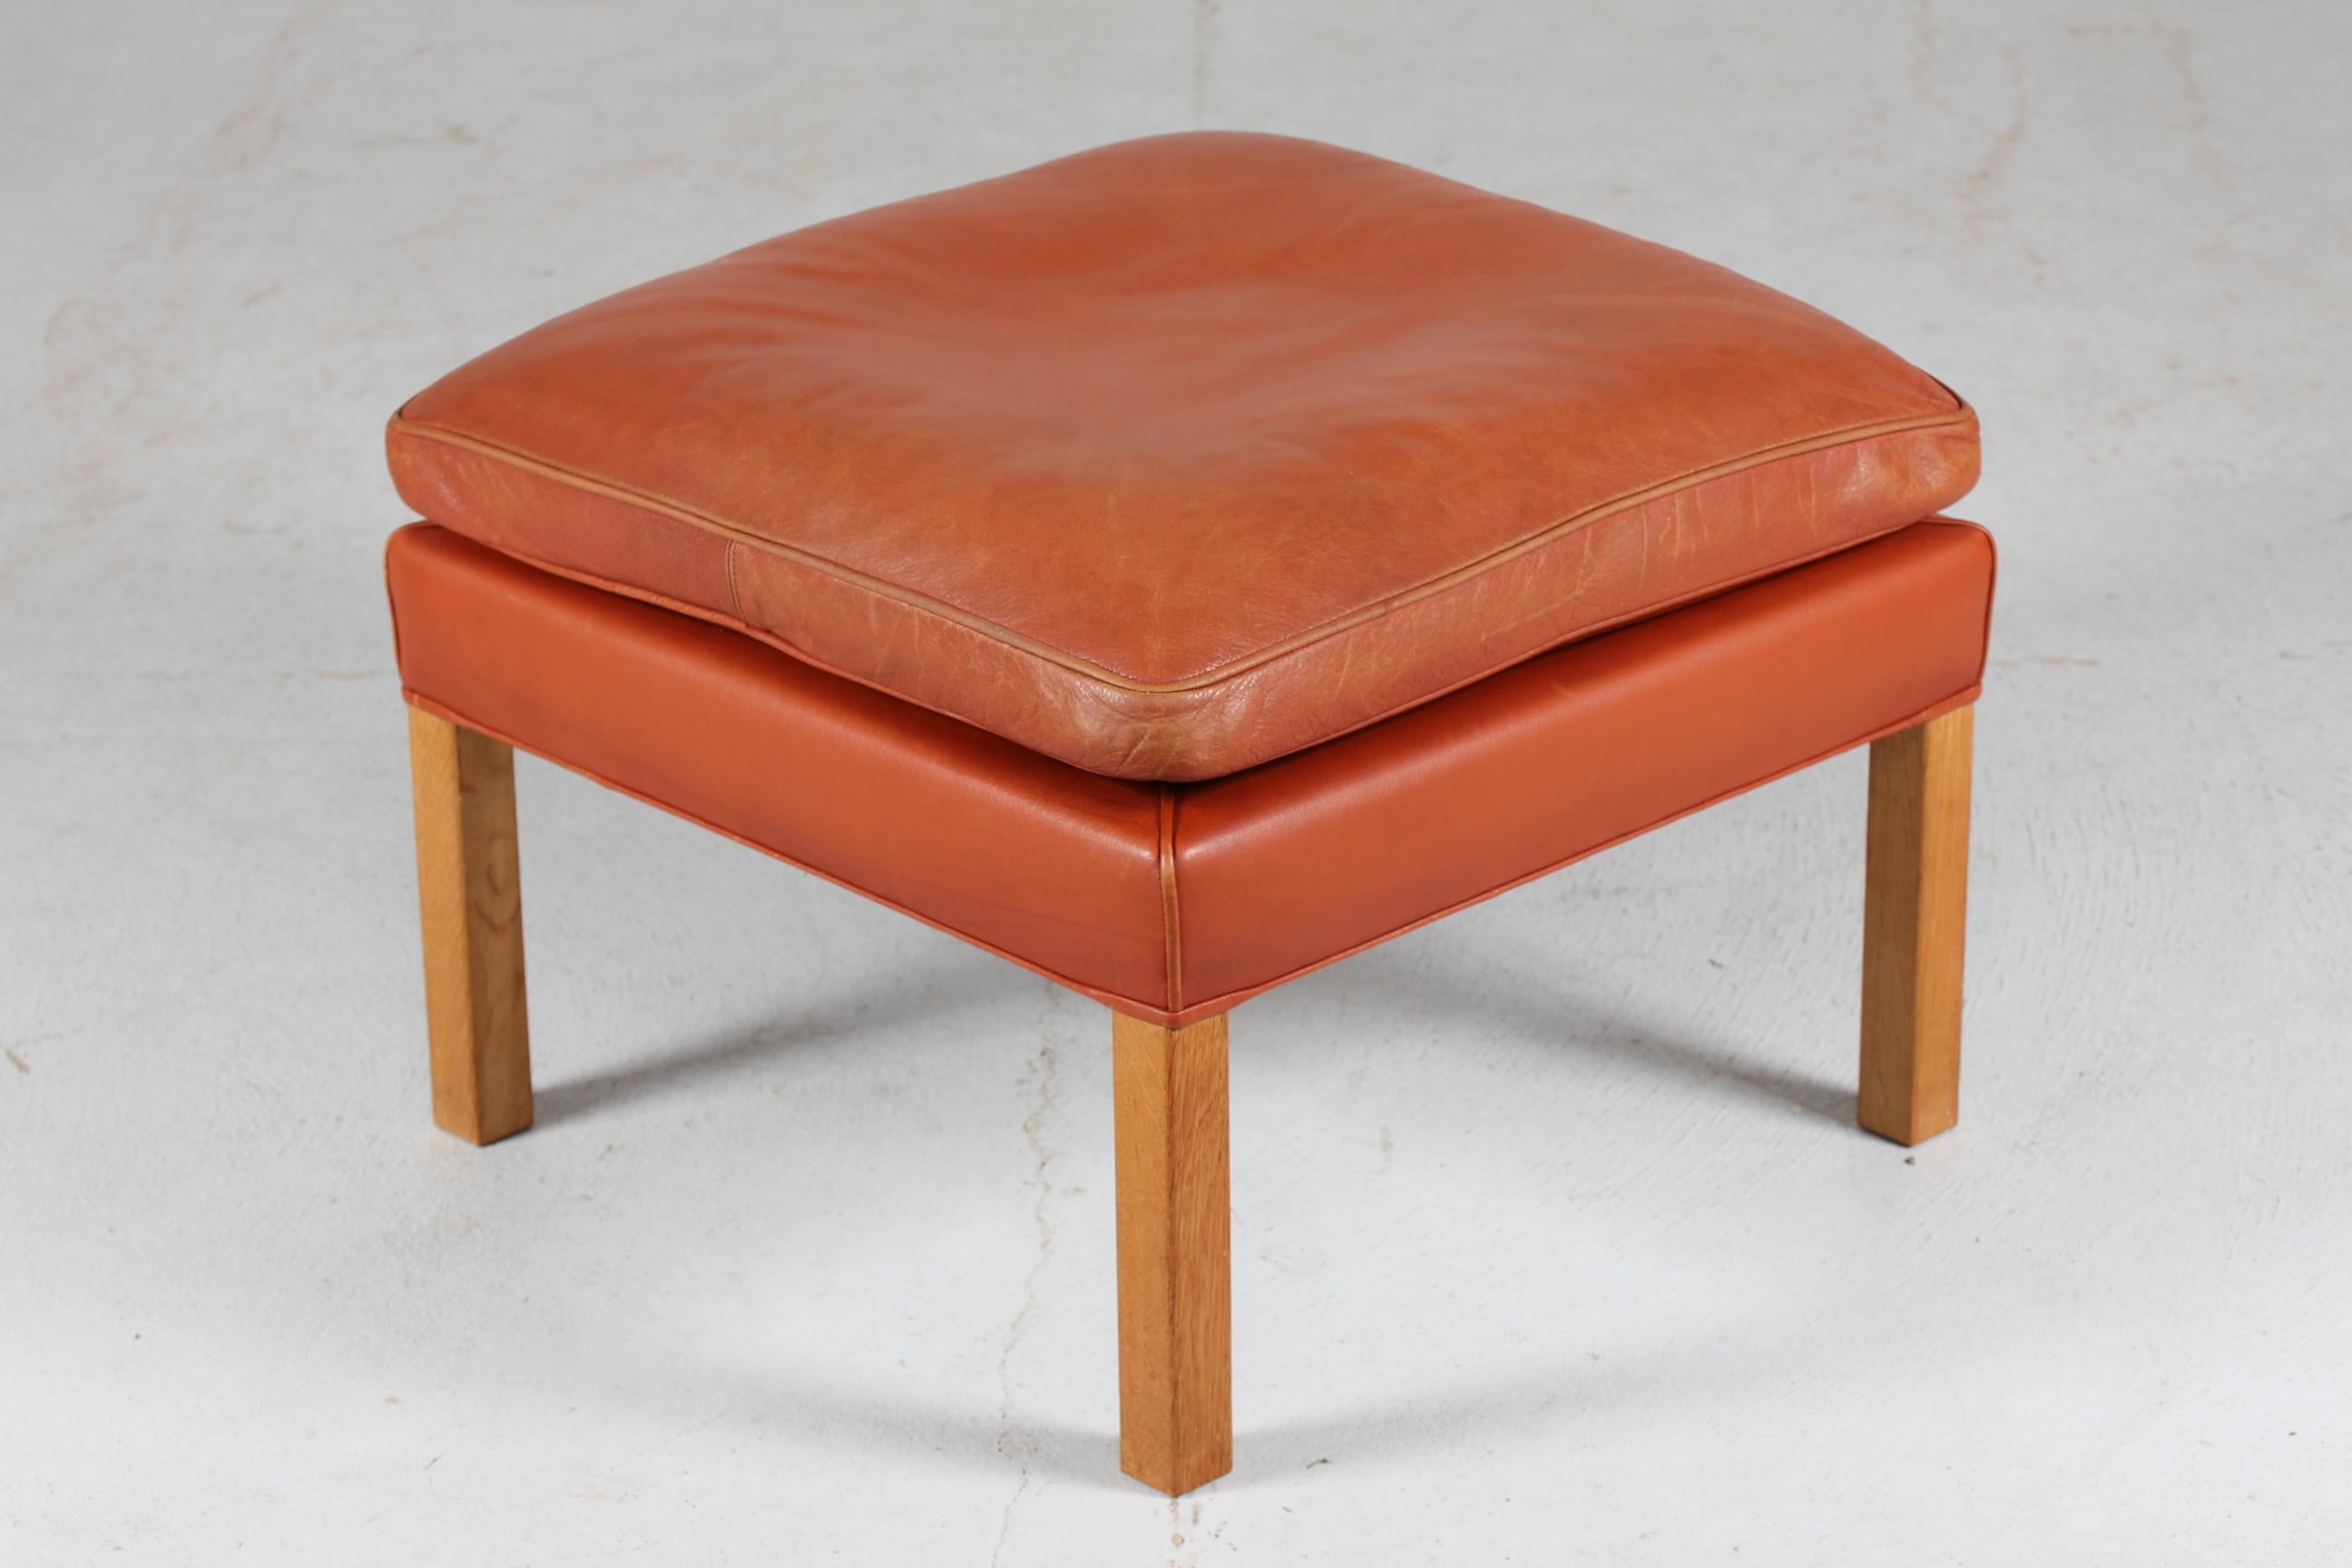 Danish vintage Børge Mogensen stool model 2202.
It's upholstered with the original cognac colored leather. The legs are made of oak. The cushion is filled inside with granules and natural feathers which give the stool a very good seating